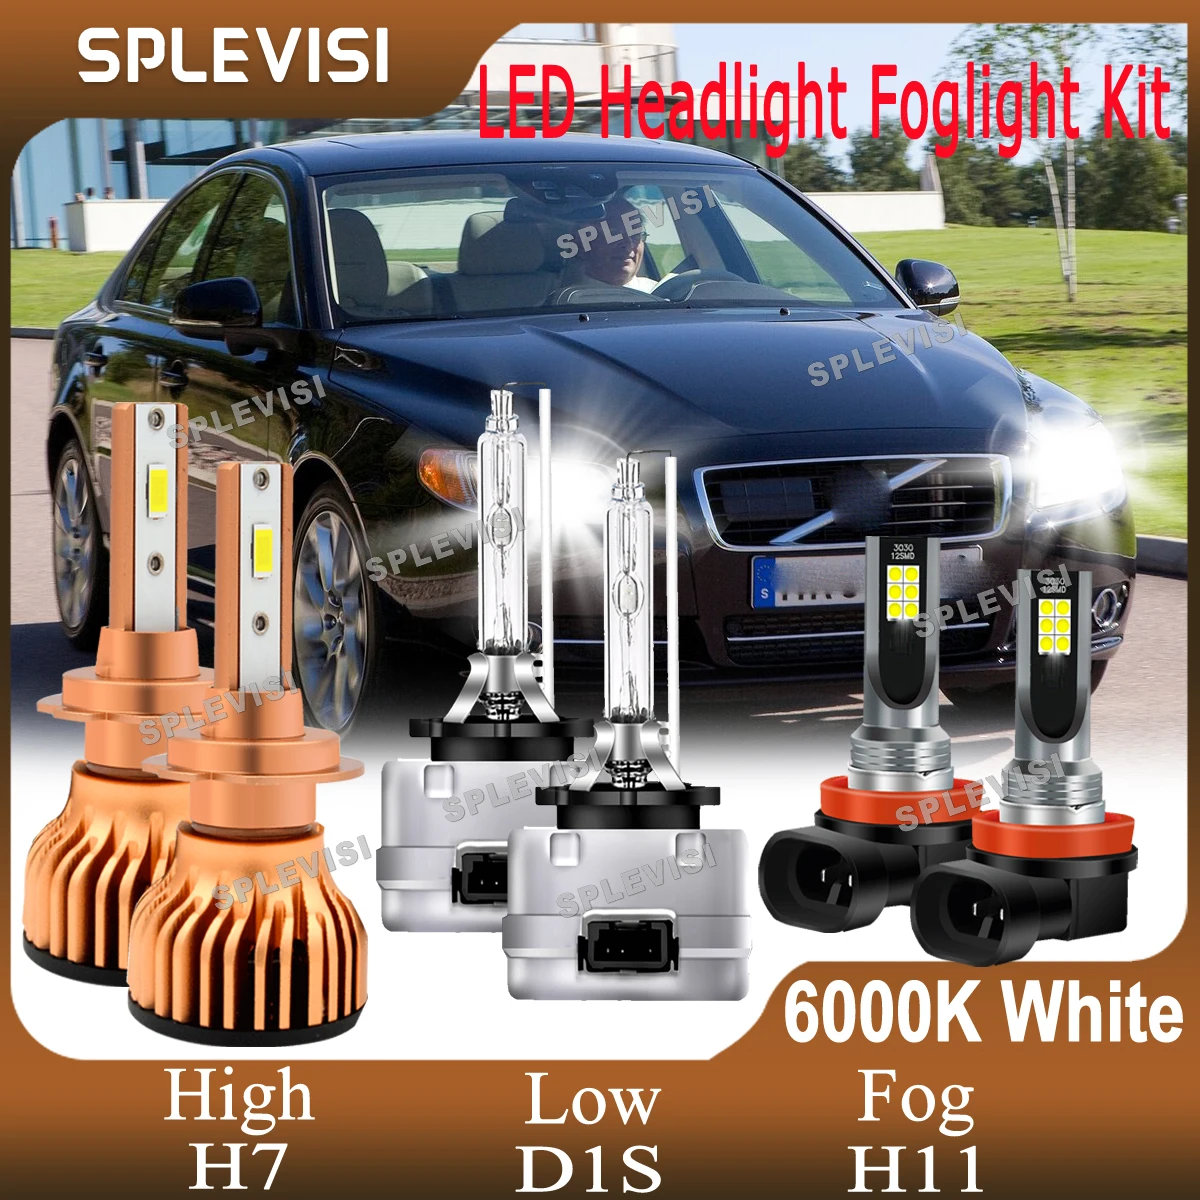 

Led Car Lamp 44000LM 420W Auto Lamp Kit For Volvo S80 2008 2009 2010 2011 2012 2013 Headlight High Low Beam Foglamp H7 D1S H11